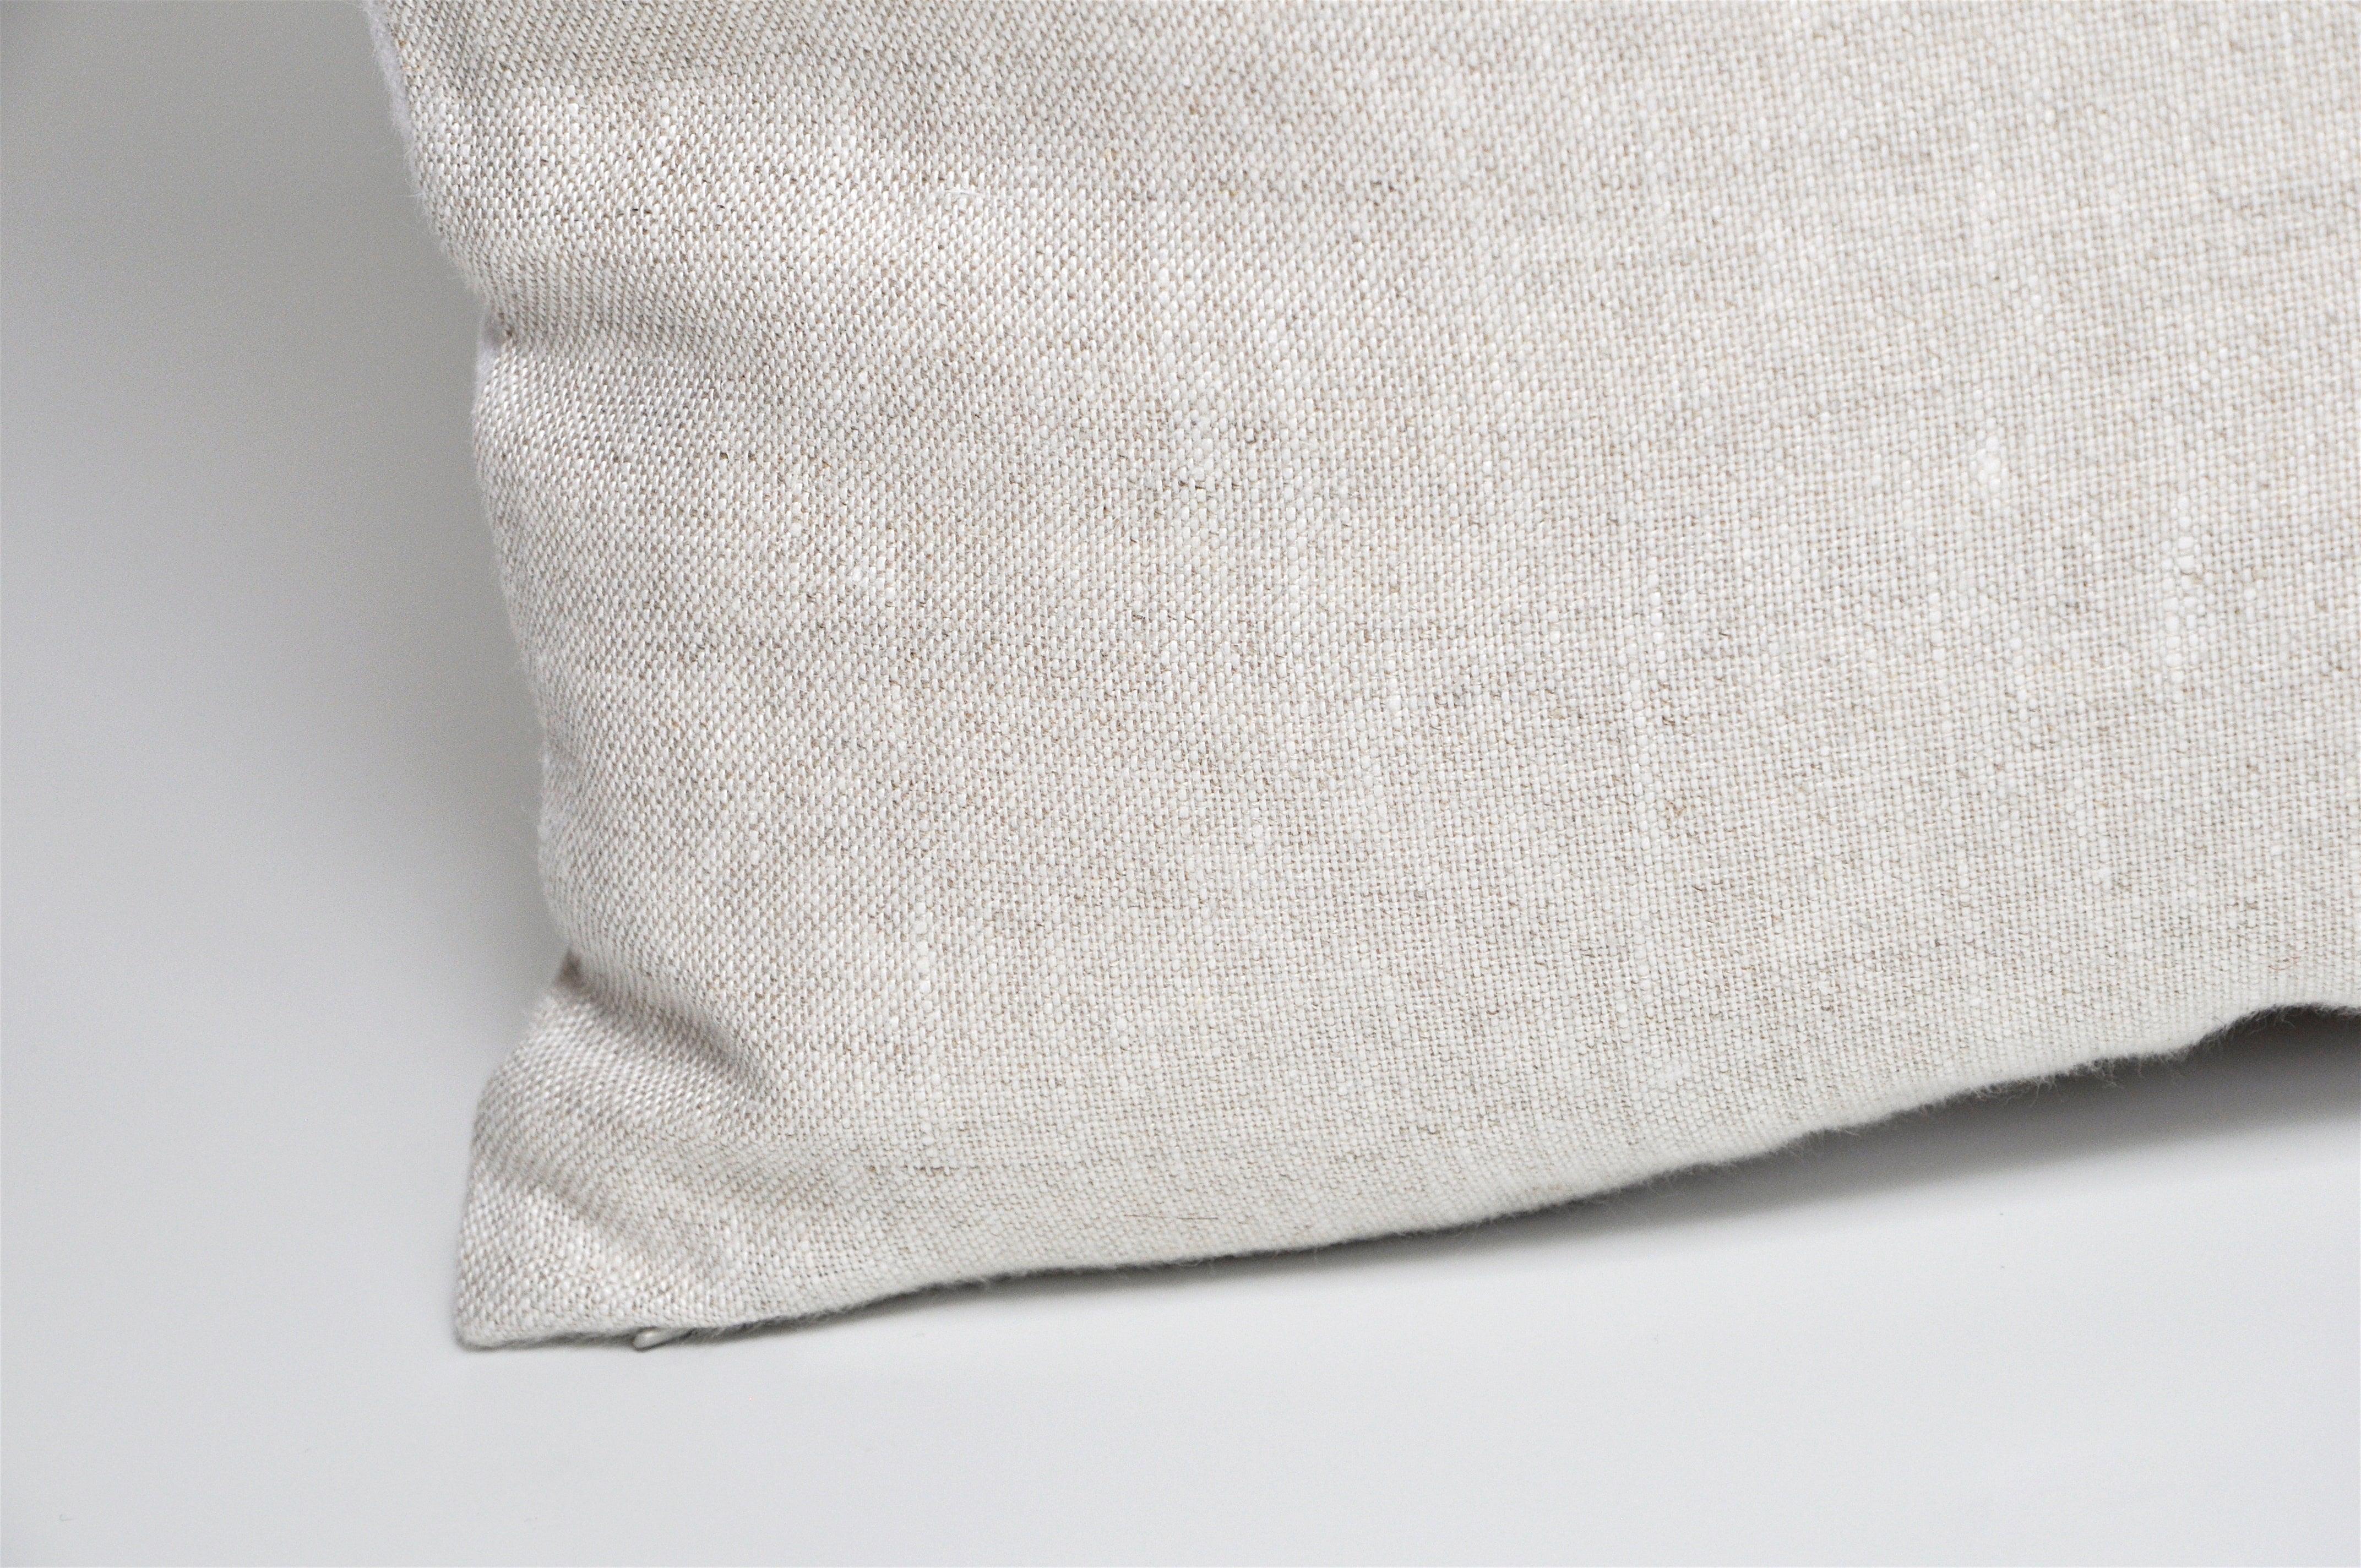 Pair of Large Contemporary Irish Linen Pillows with Vintage Patch White Oatmeal In Good Condition For Sale In Belfast, Northern Ireland